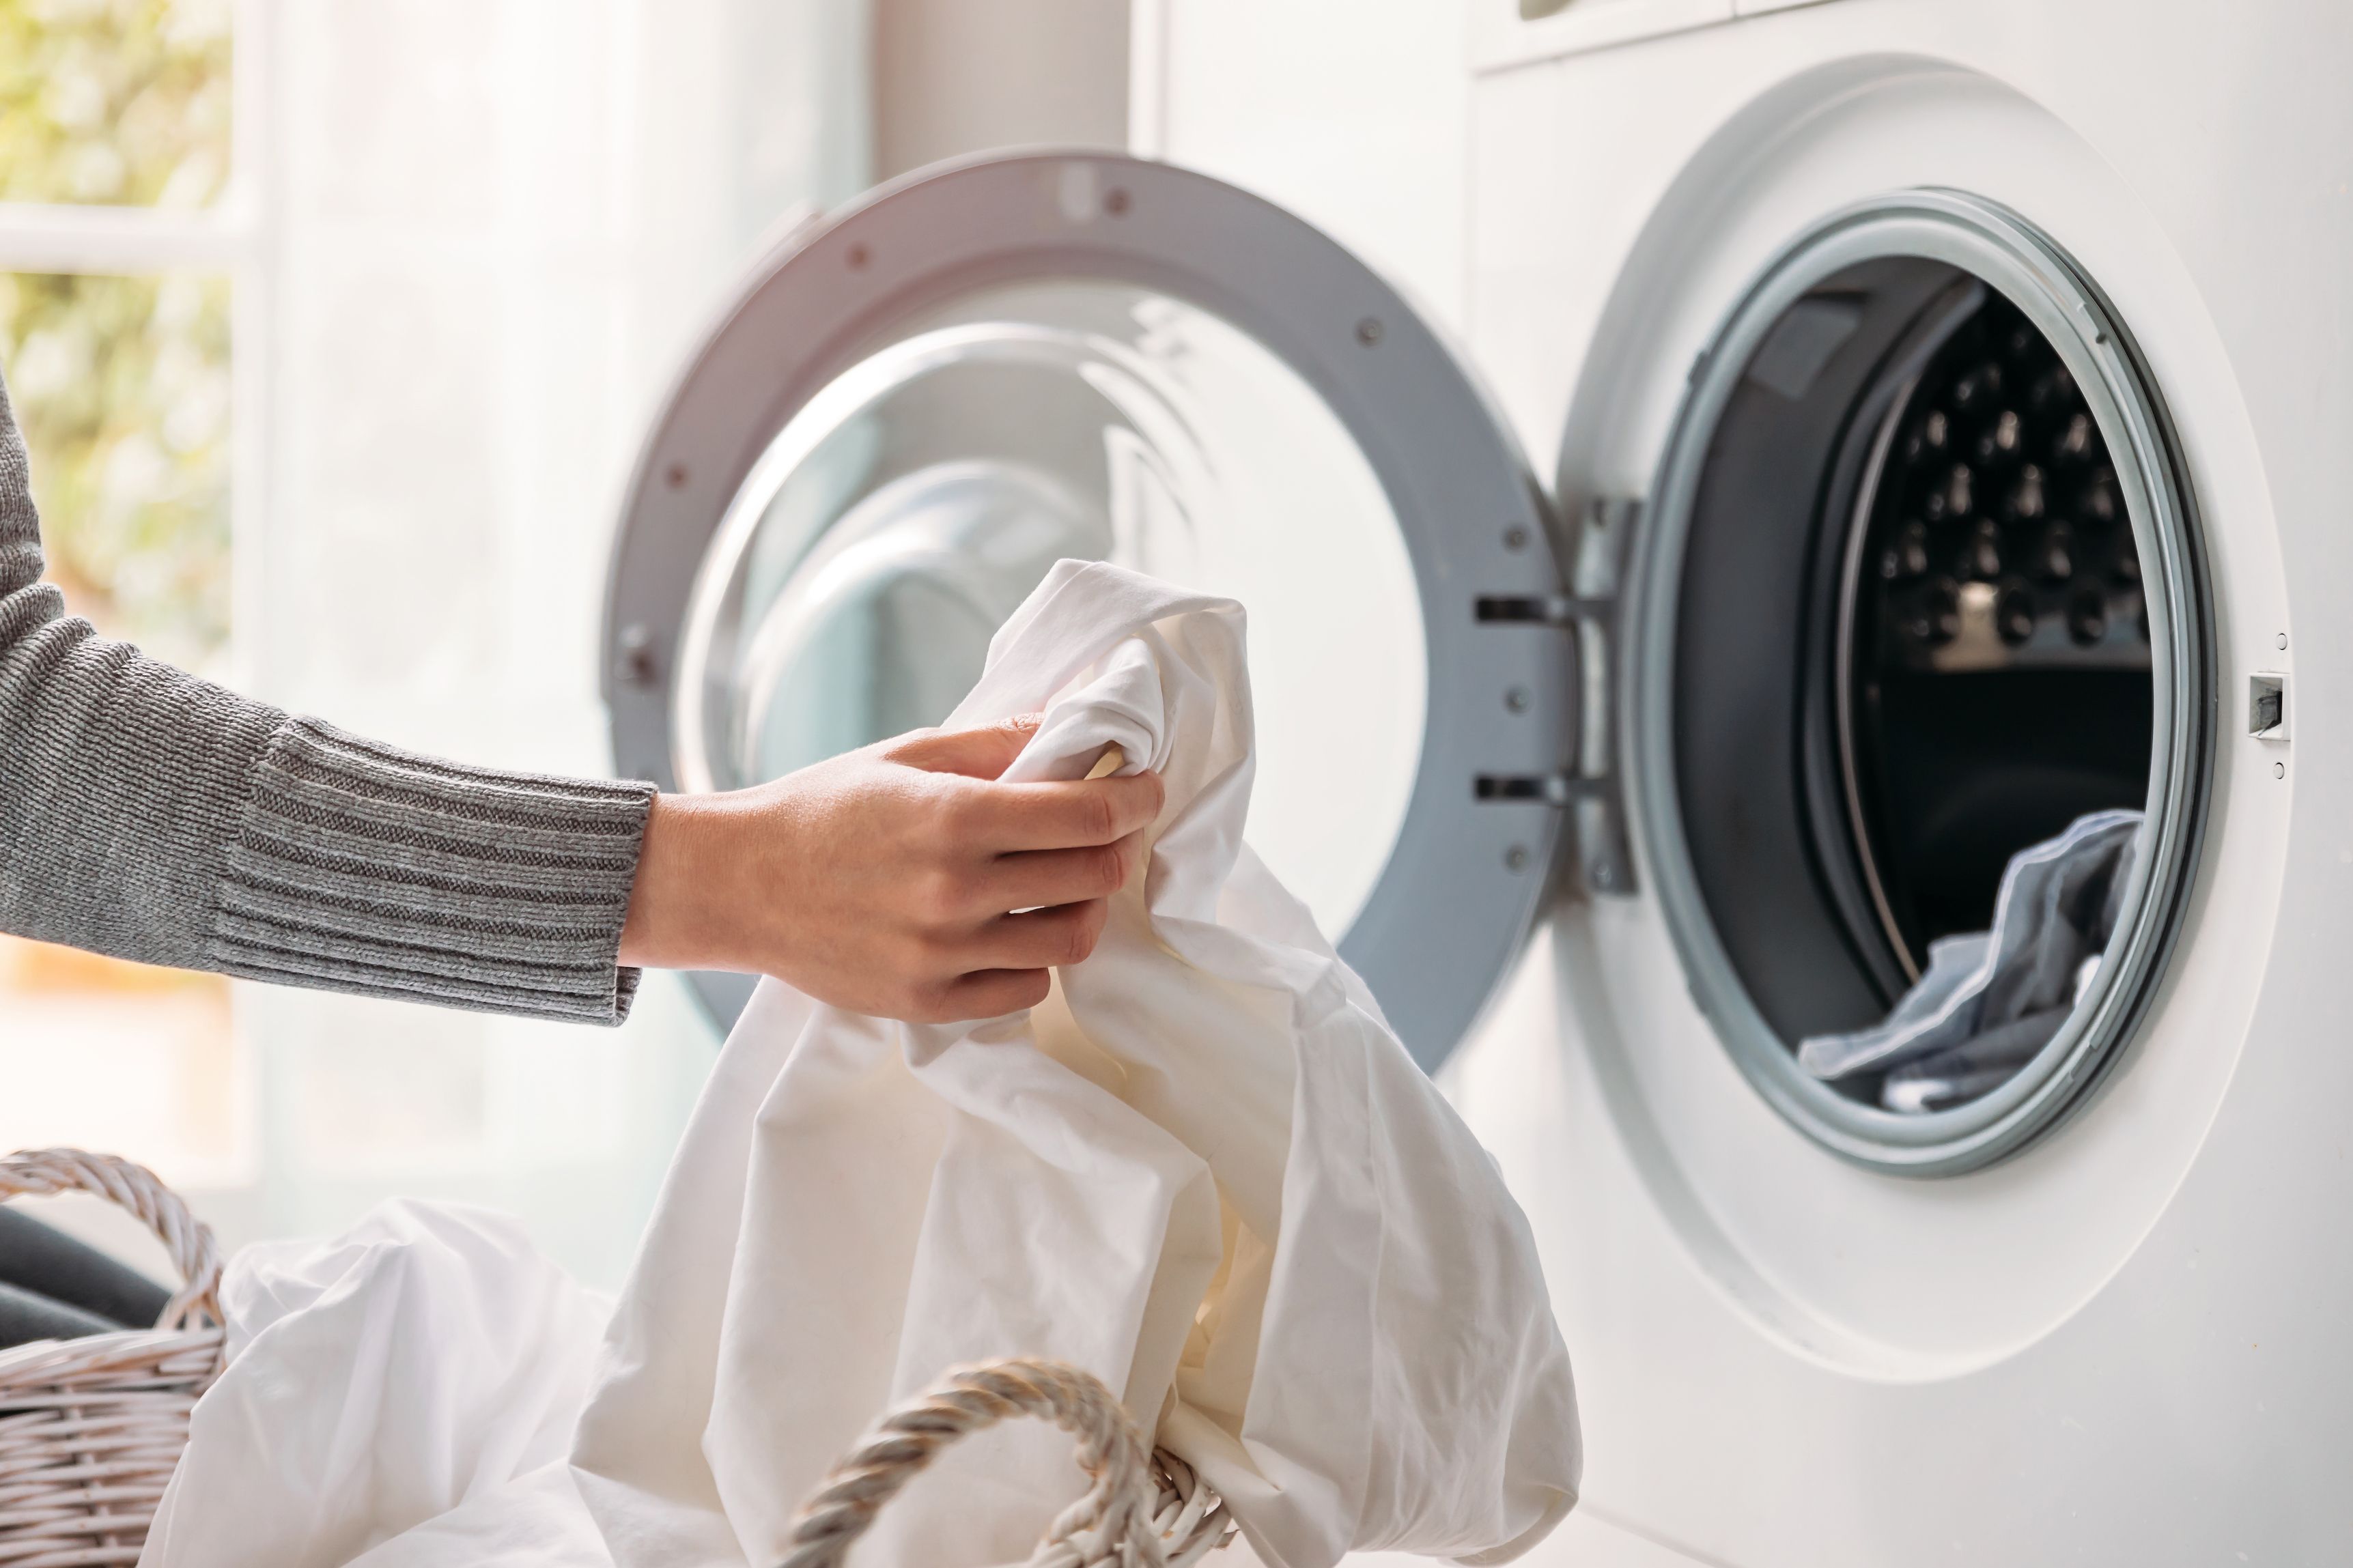 Your Laundry Sheds Harmful Microfibers. Here's What You Can Do About It.